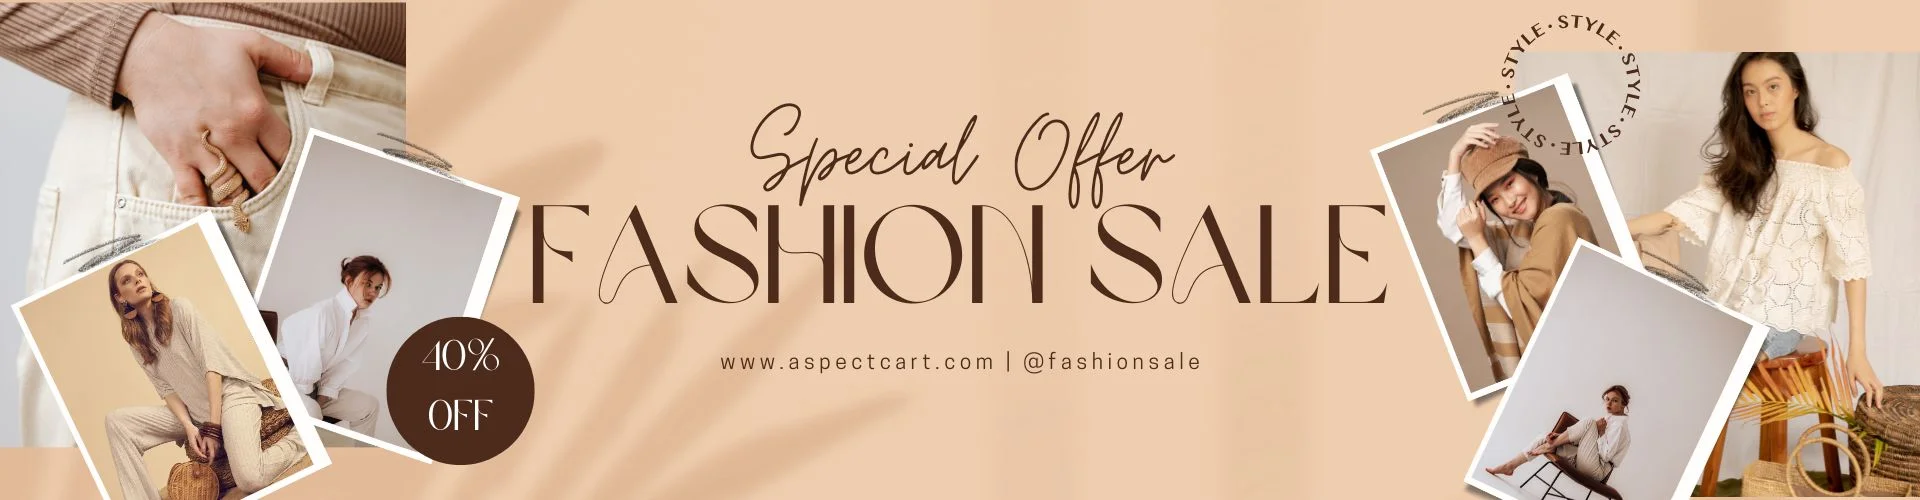 Special offer banner for a Fashion E-shop